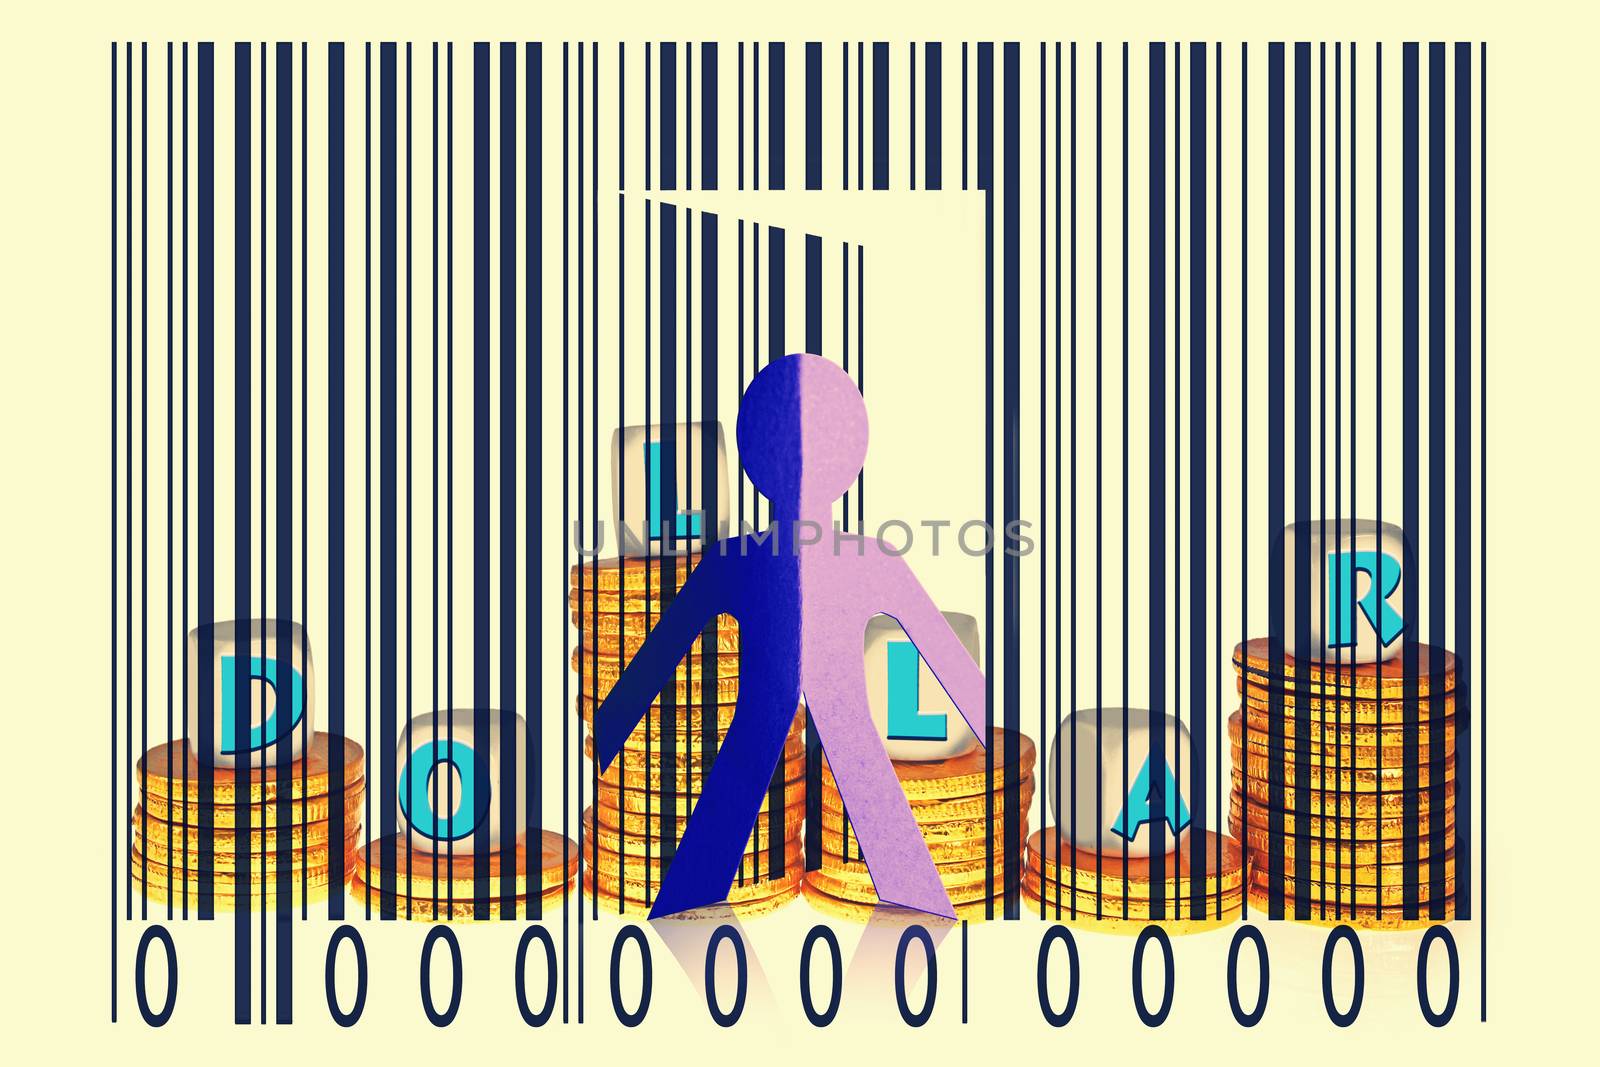 Paperman coming out of a bar code with Dollars word